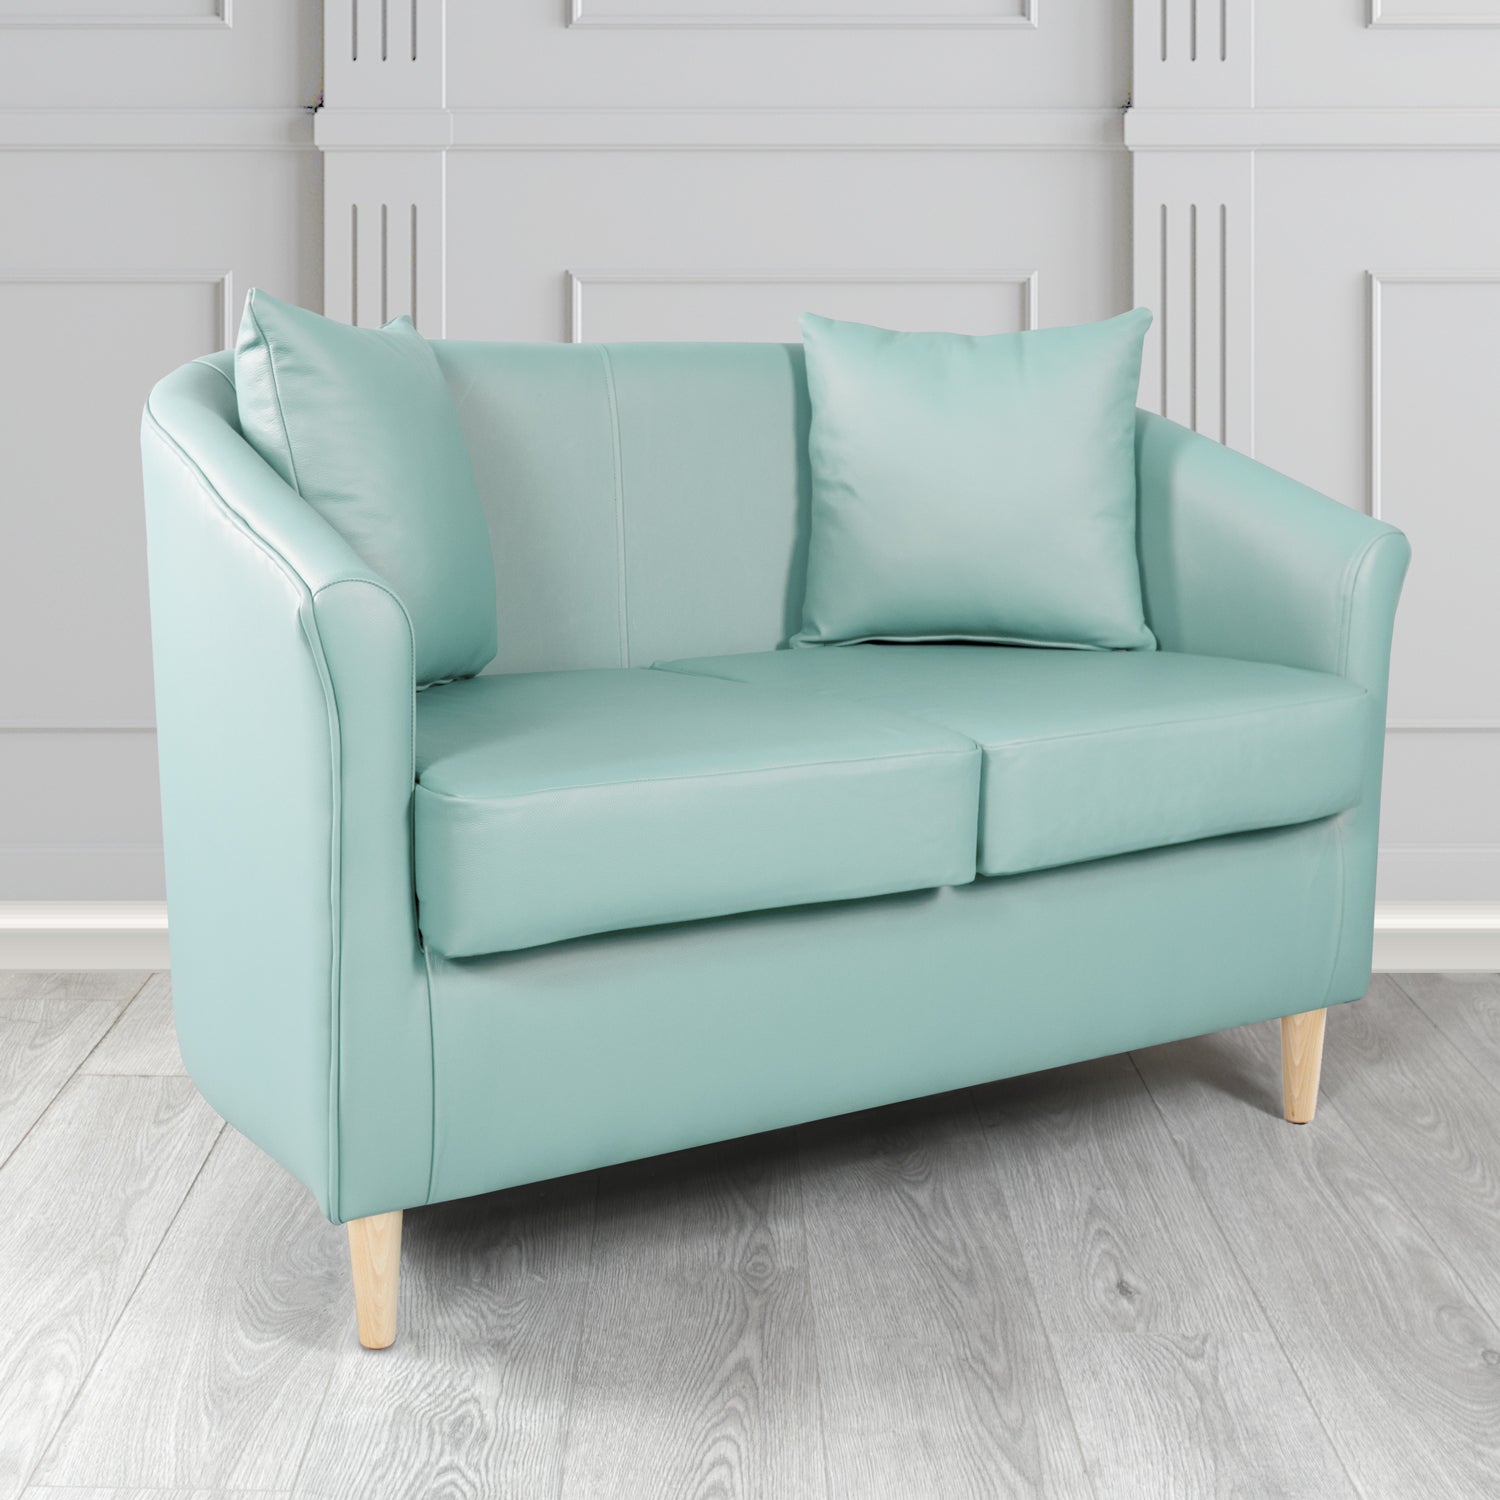 St Tropez Shelly Parlour Blue Crib 5 Genuine Leather 2 Seater Tub Sofa with Scatter Cushions - The Tub Chair Shop